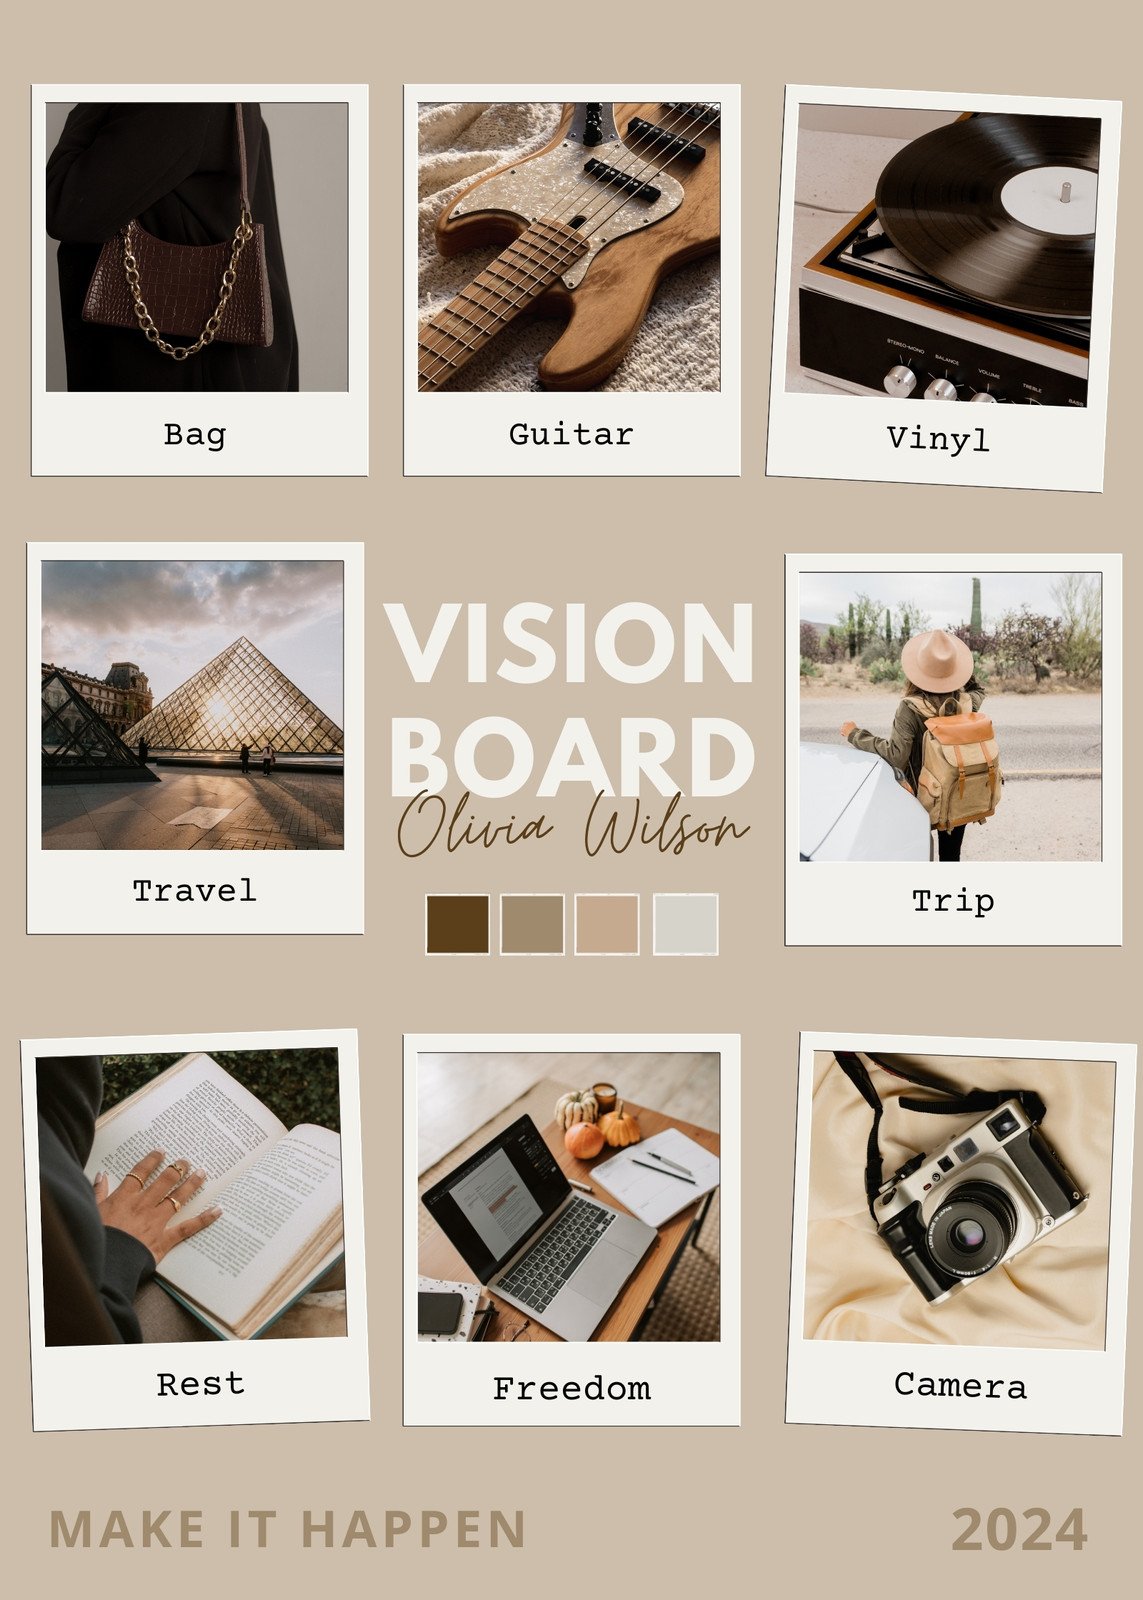 How to Make a Vision Board for 2024